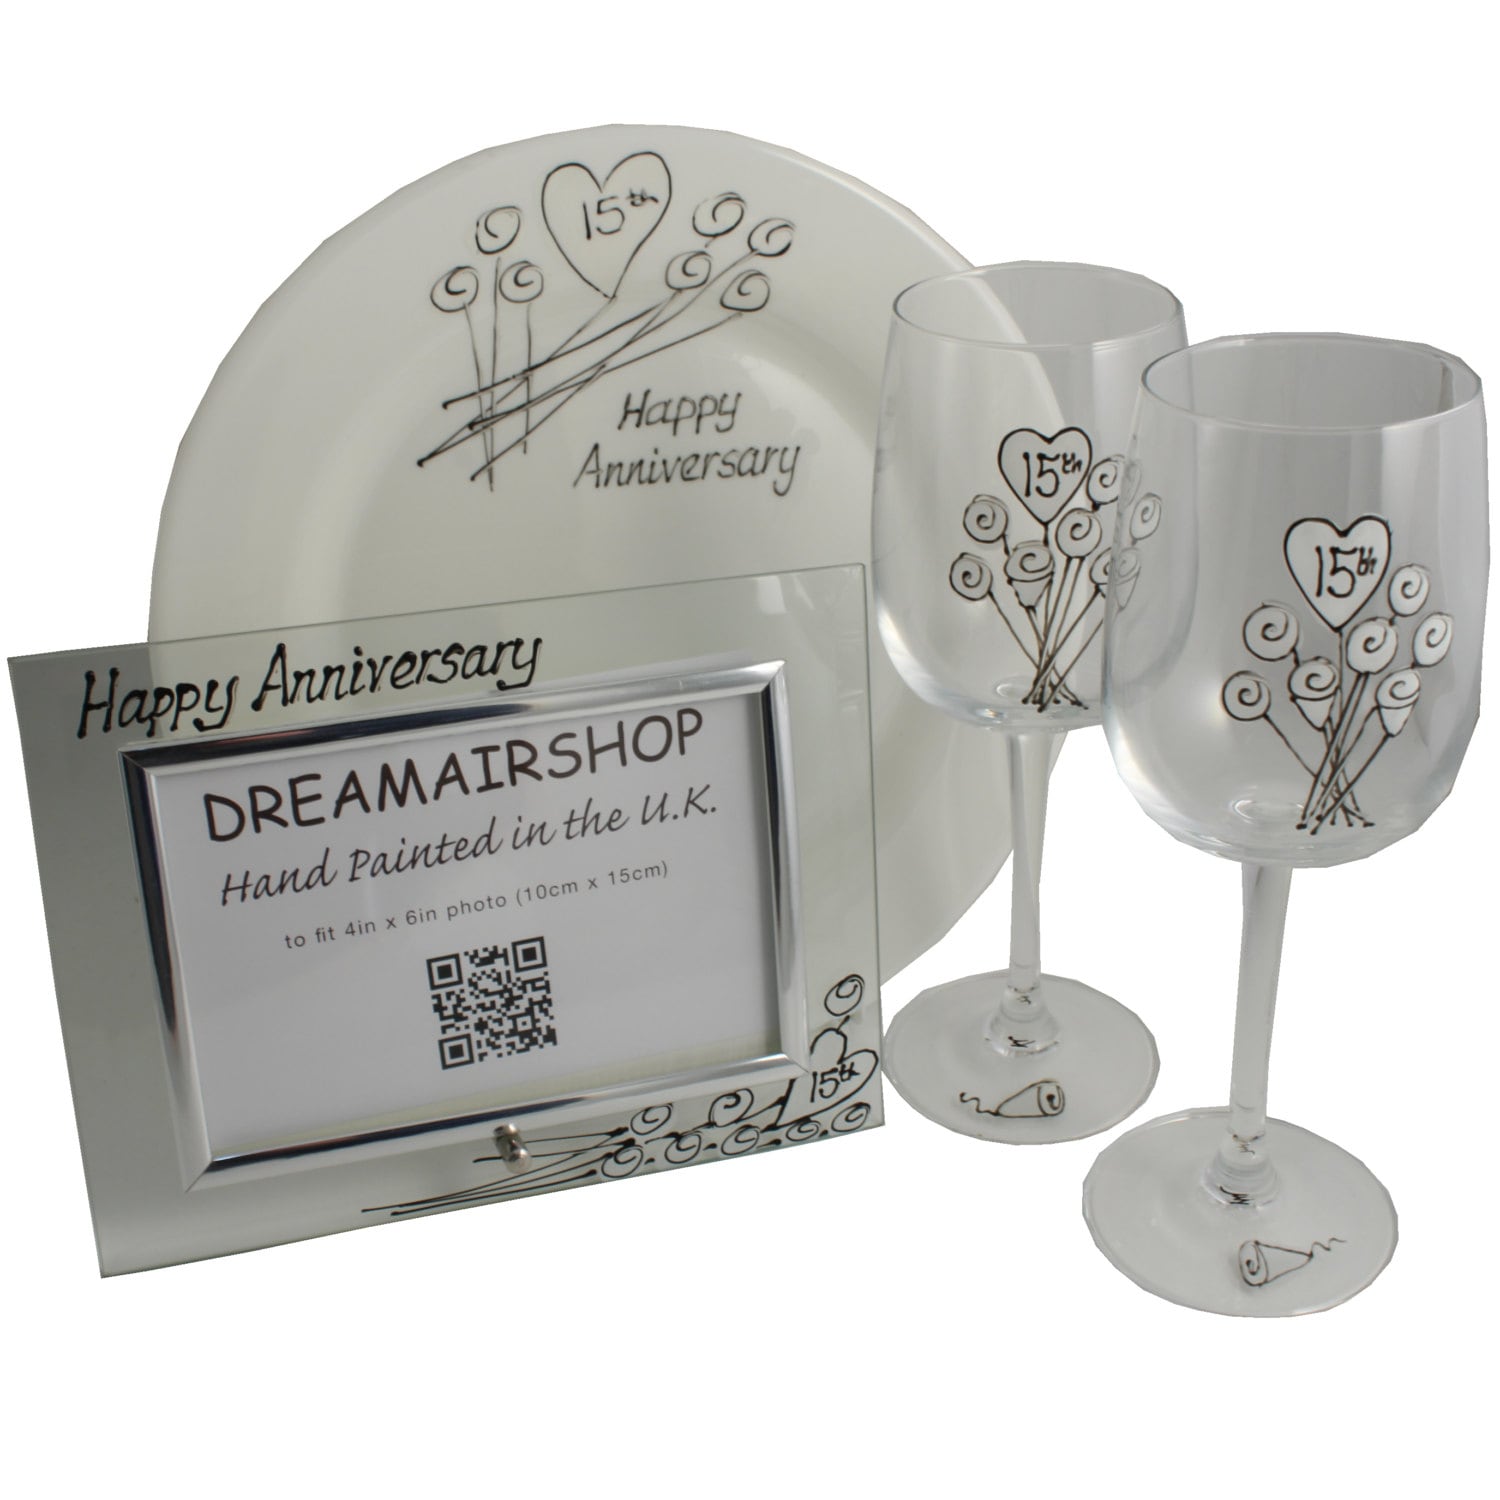 Crystal Anniversary Gifts
 PERSONALISED 15th Crystal Wedding Anniversary Gift Sets